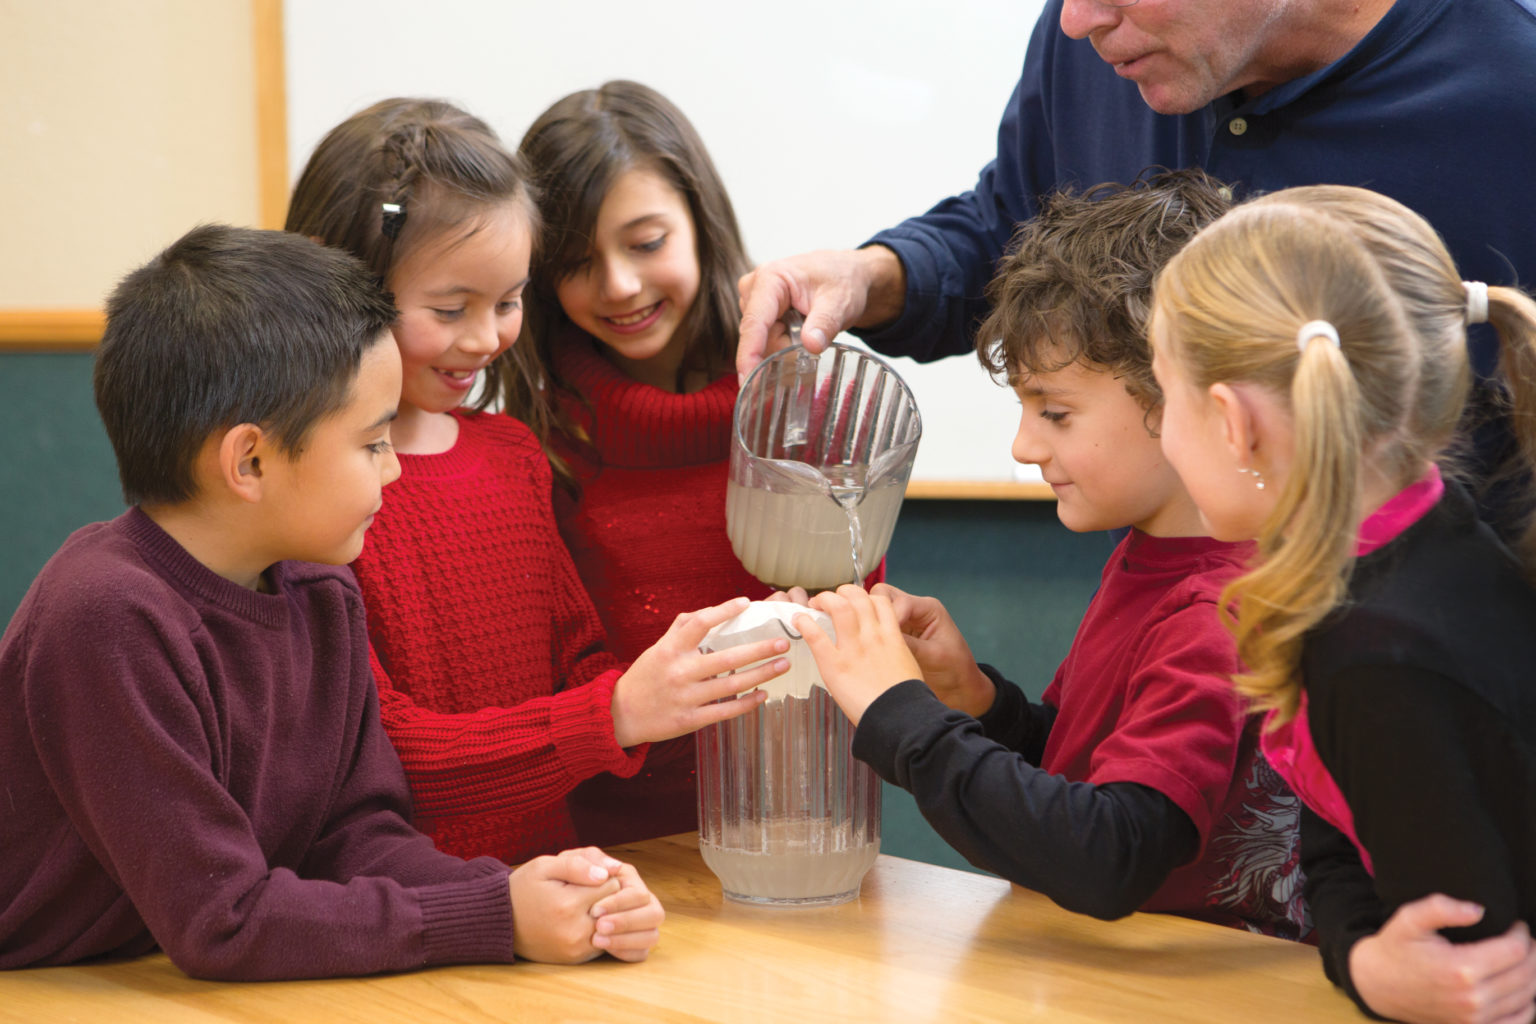 A group of elementary aged children gather around as their teacher pours lemonade through a coffee filter.